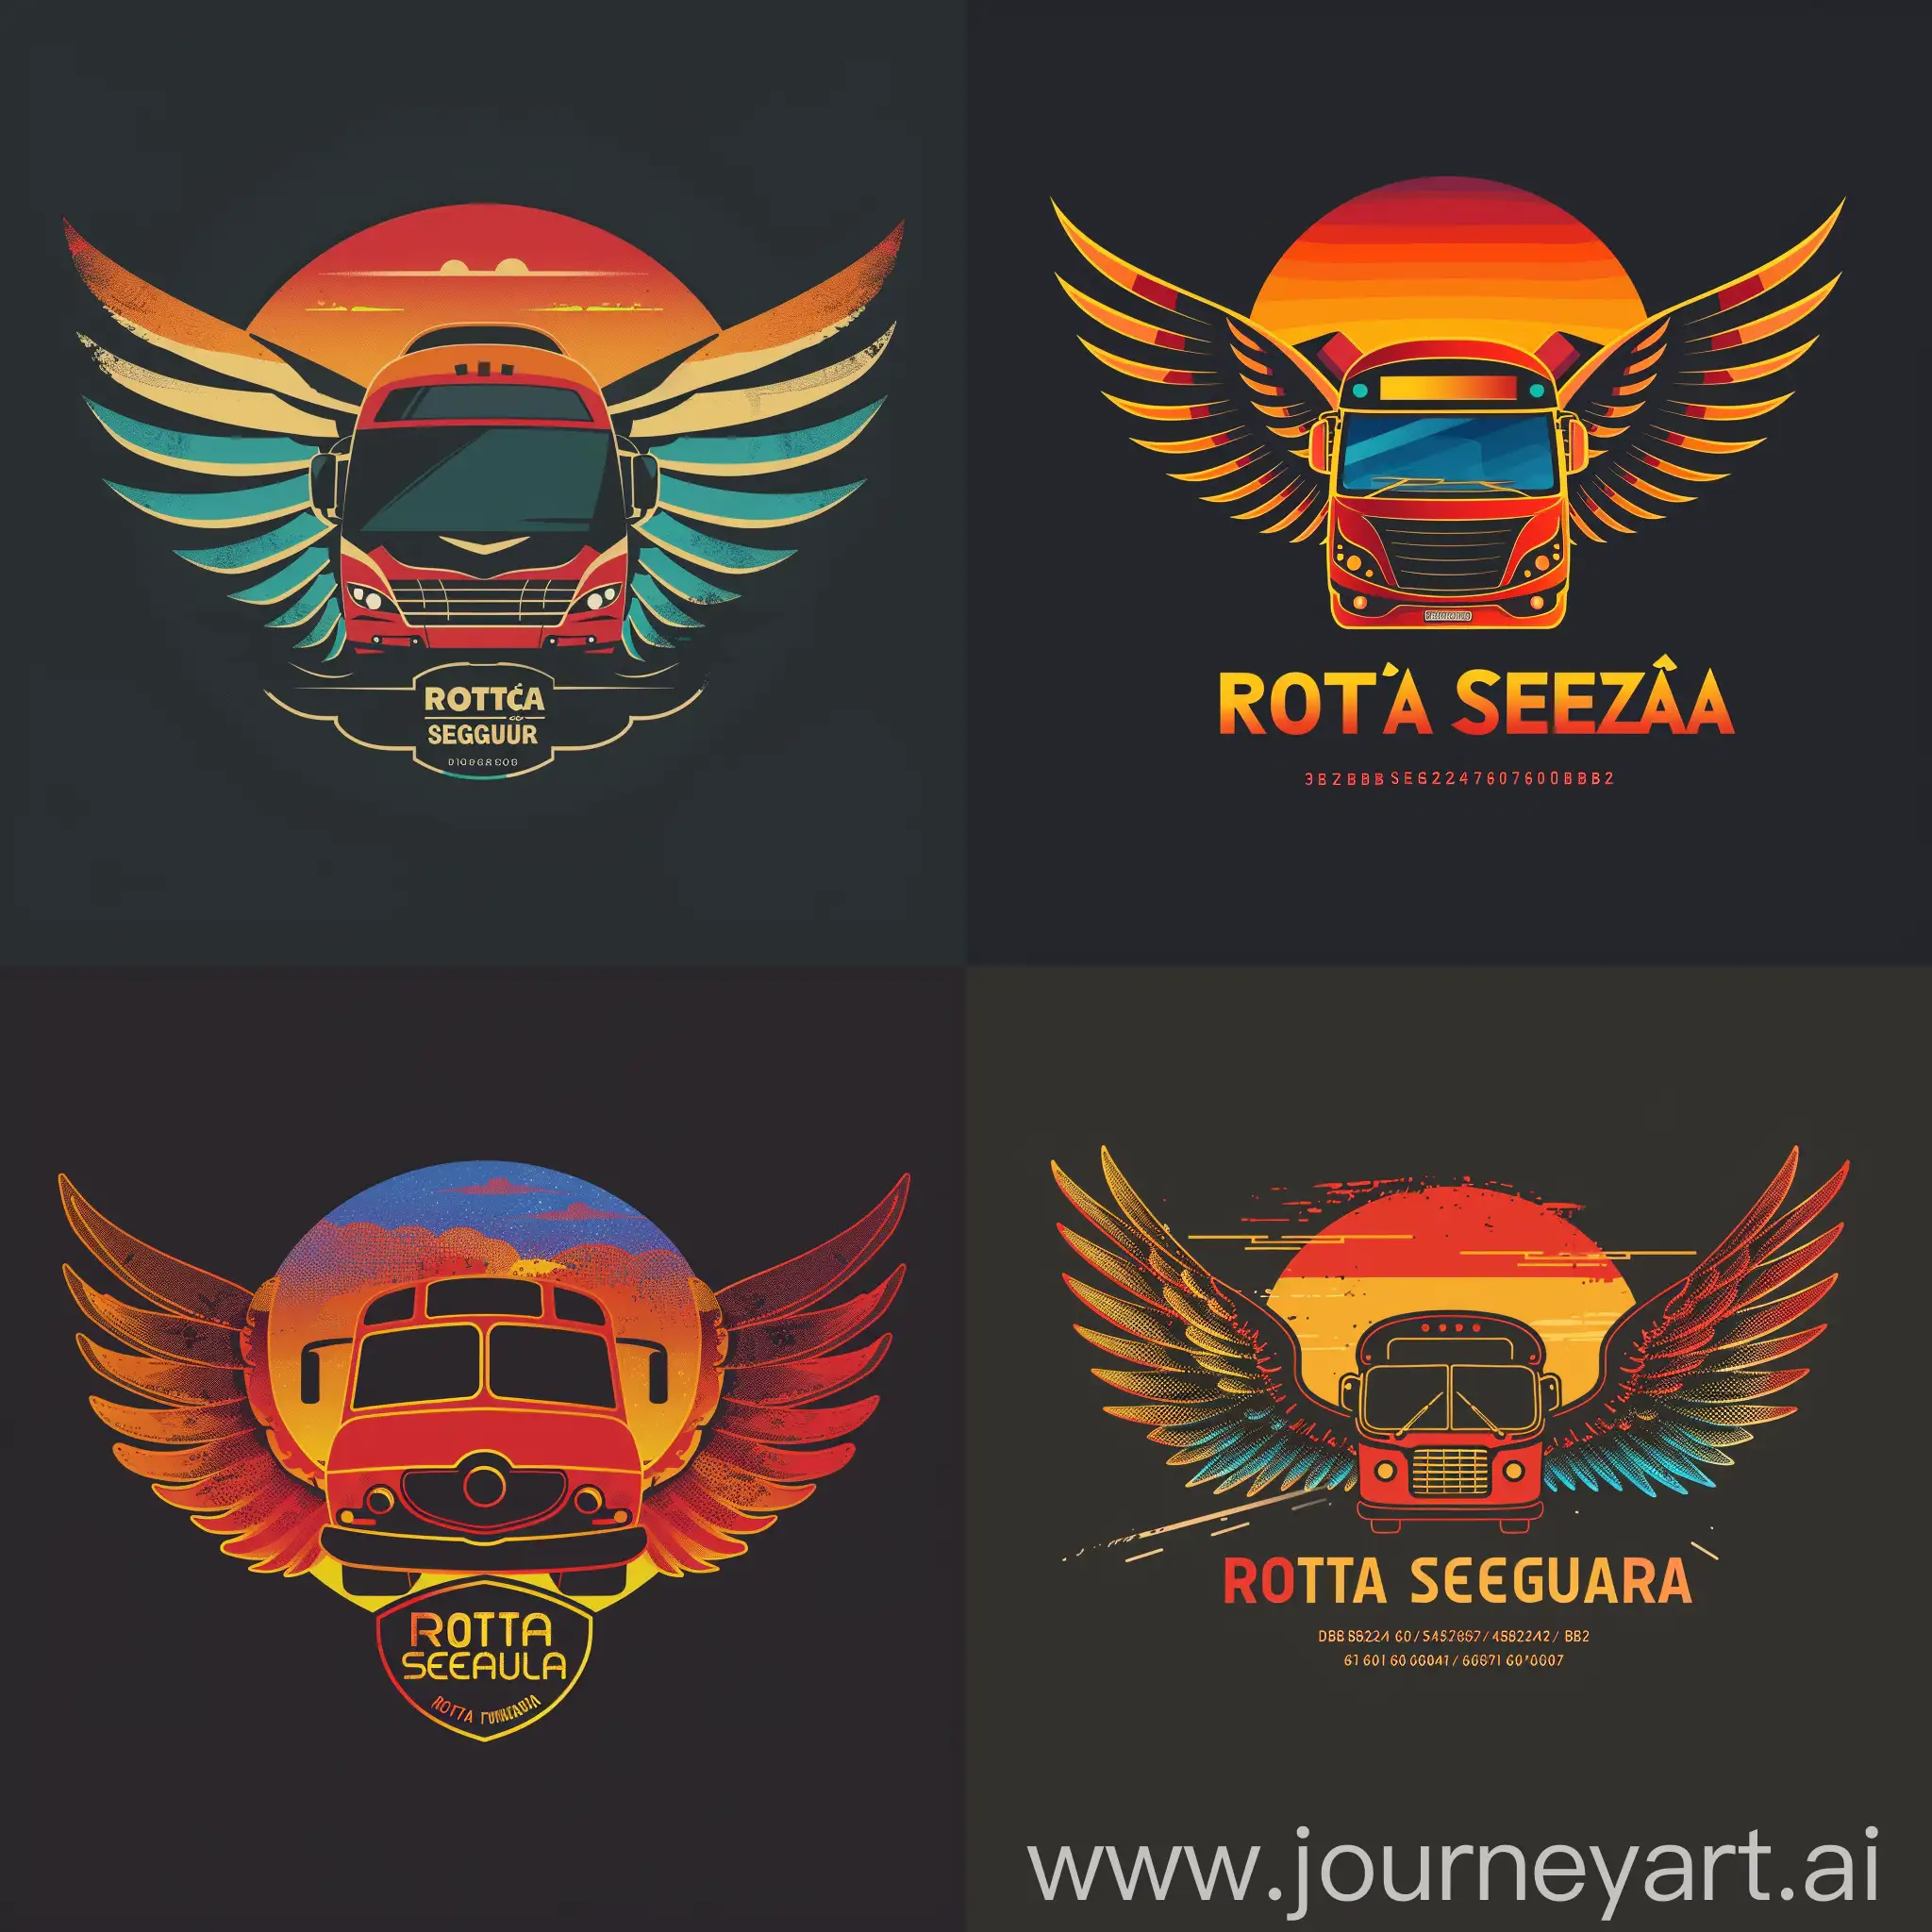 Create a logo for a bus company, for an internal project that focus on the passenger's safety. We have some business pillars that goes around safety, take care with passengers, vehicle care, excelence in travels. Name of the project is "Rota Segura" and the color codes I would like to use are: d41b24 , b0b1b2 , 606062 , 060507 , ffffff. Use colours, be creative, 3d logo, wings, sunset, badges,  red bus, roads

